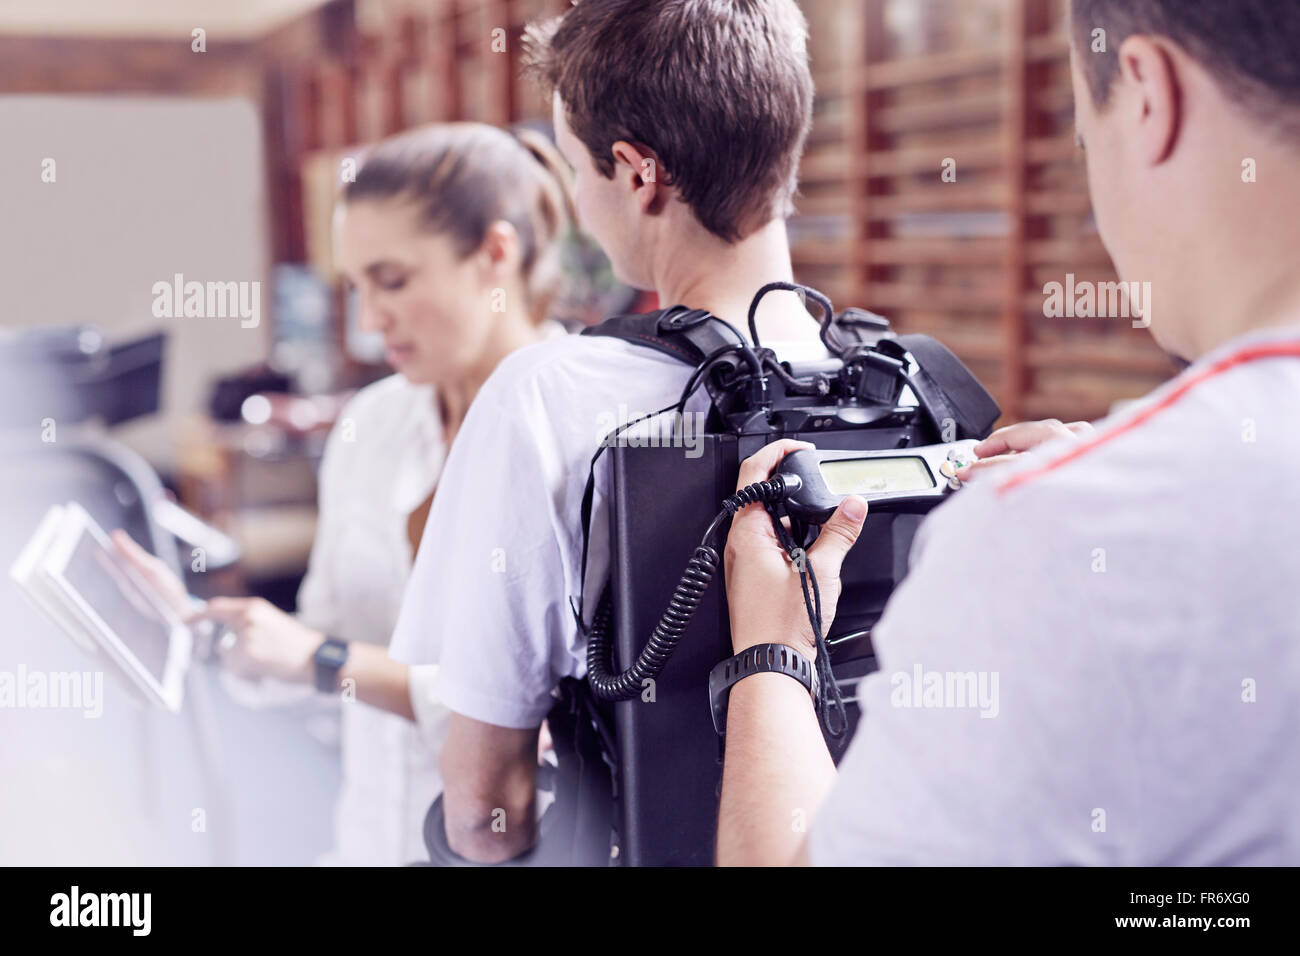 Physical therapist checking equipment monitor on man’s back Stock Photo